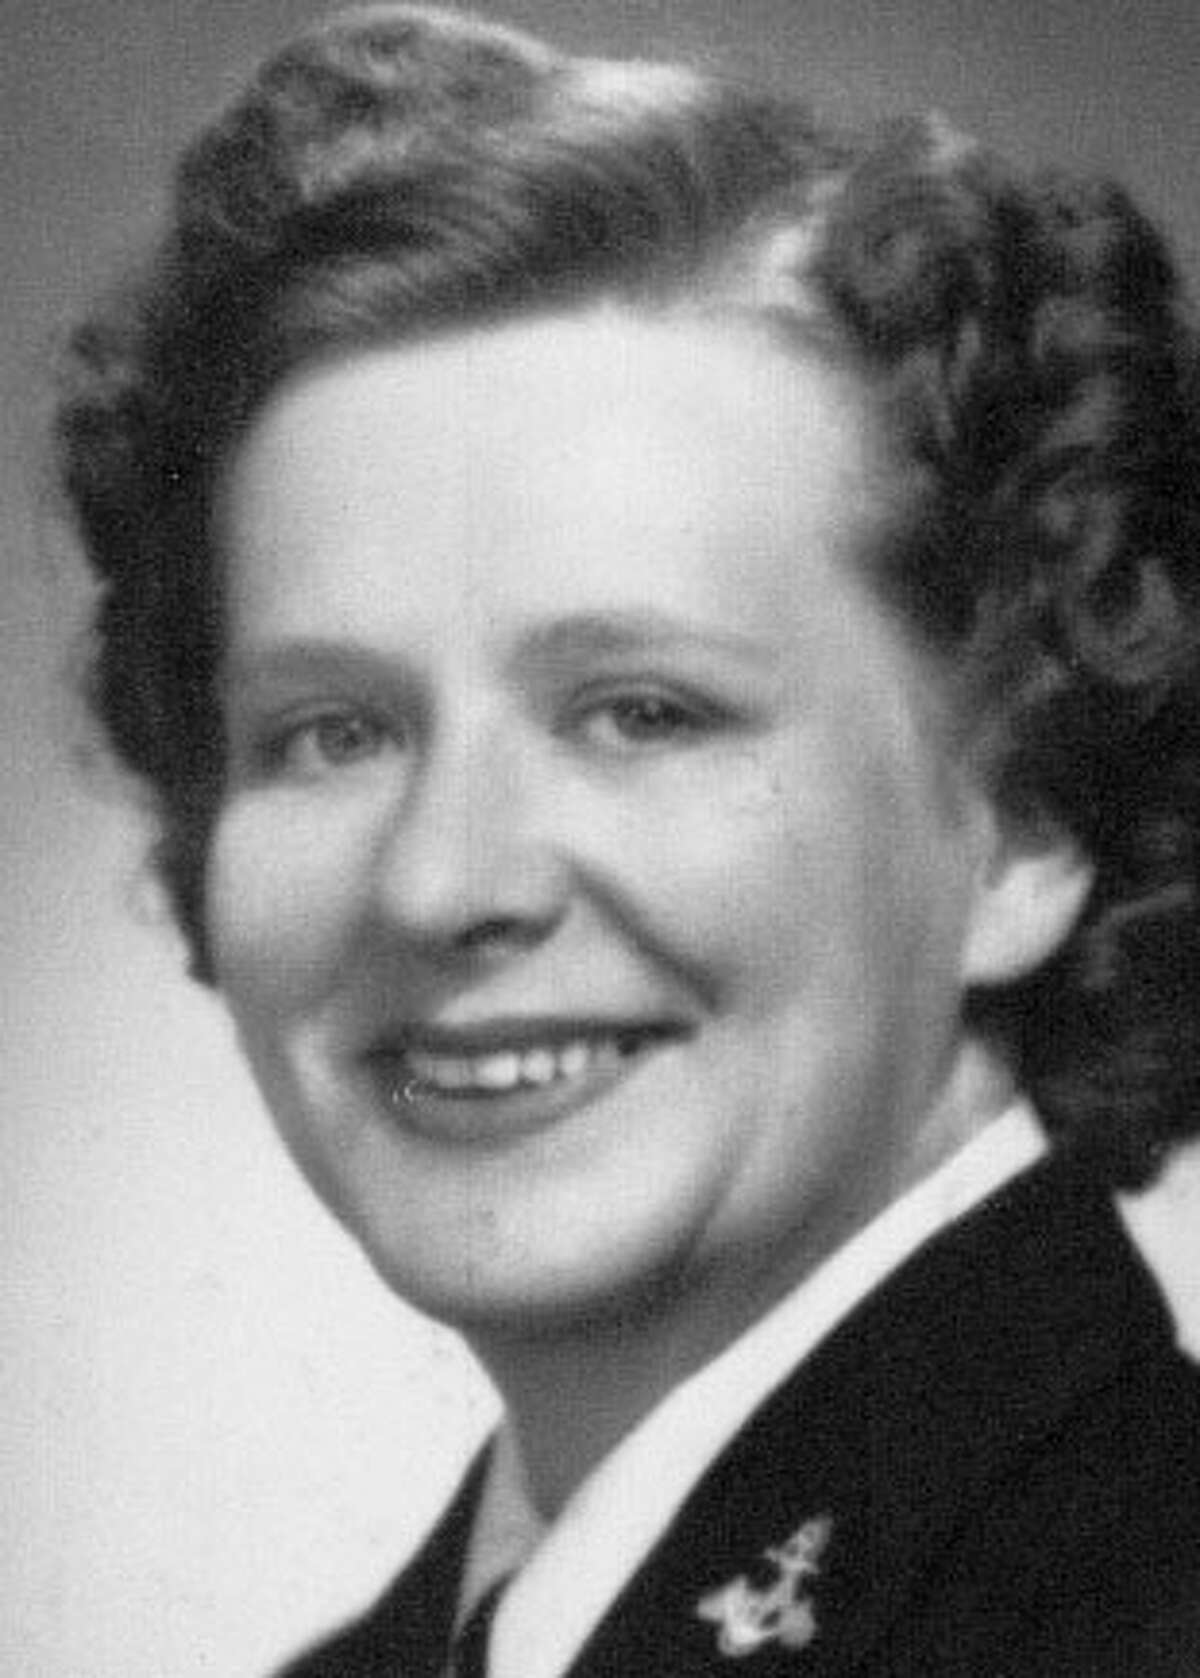 Alice Douglas Jennings, 95, of Bridgeport, died March 16, 2013, at Masonicare of Newtown. She was the wife of the late Earl Jennings. Alice was born march 28, 1917, in Cumberland, R.I., daughter of the late Albert and Nellie (Longton) Douglas of New Milford. Her early years were spent in New Milford, graduating with the New Milford High School, Class of 1935.